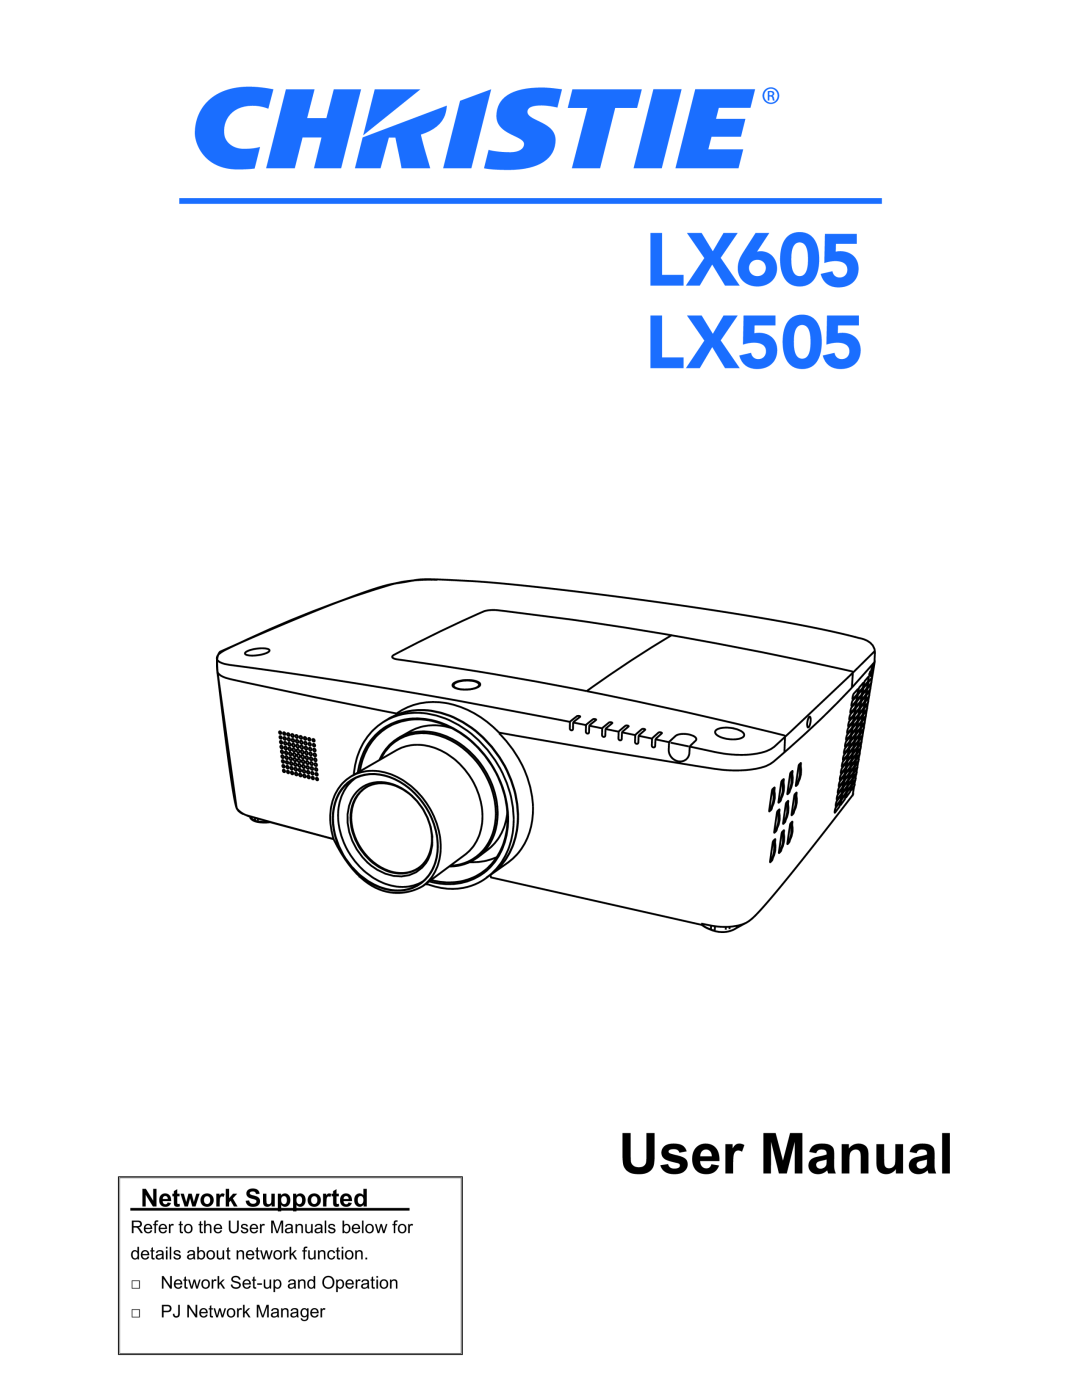 Christie Digital Systems LX605 manual User Manual, Network Supported 